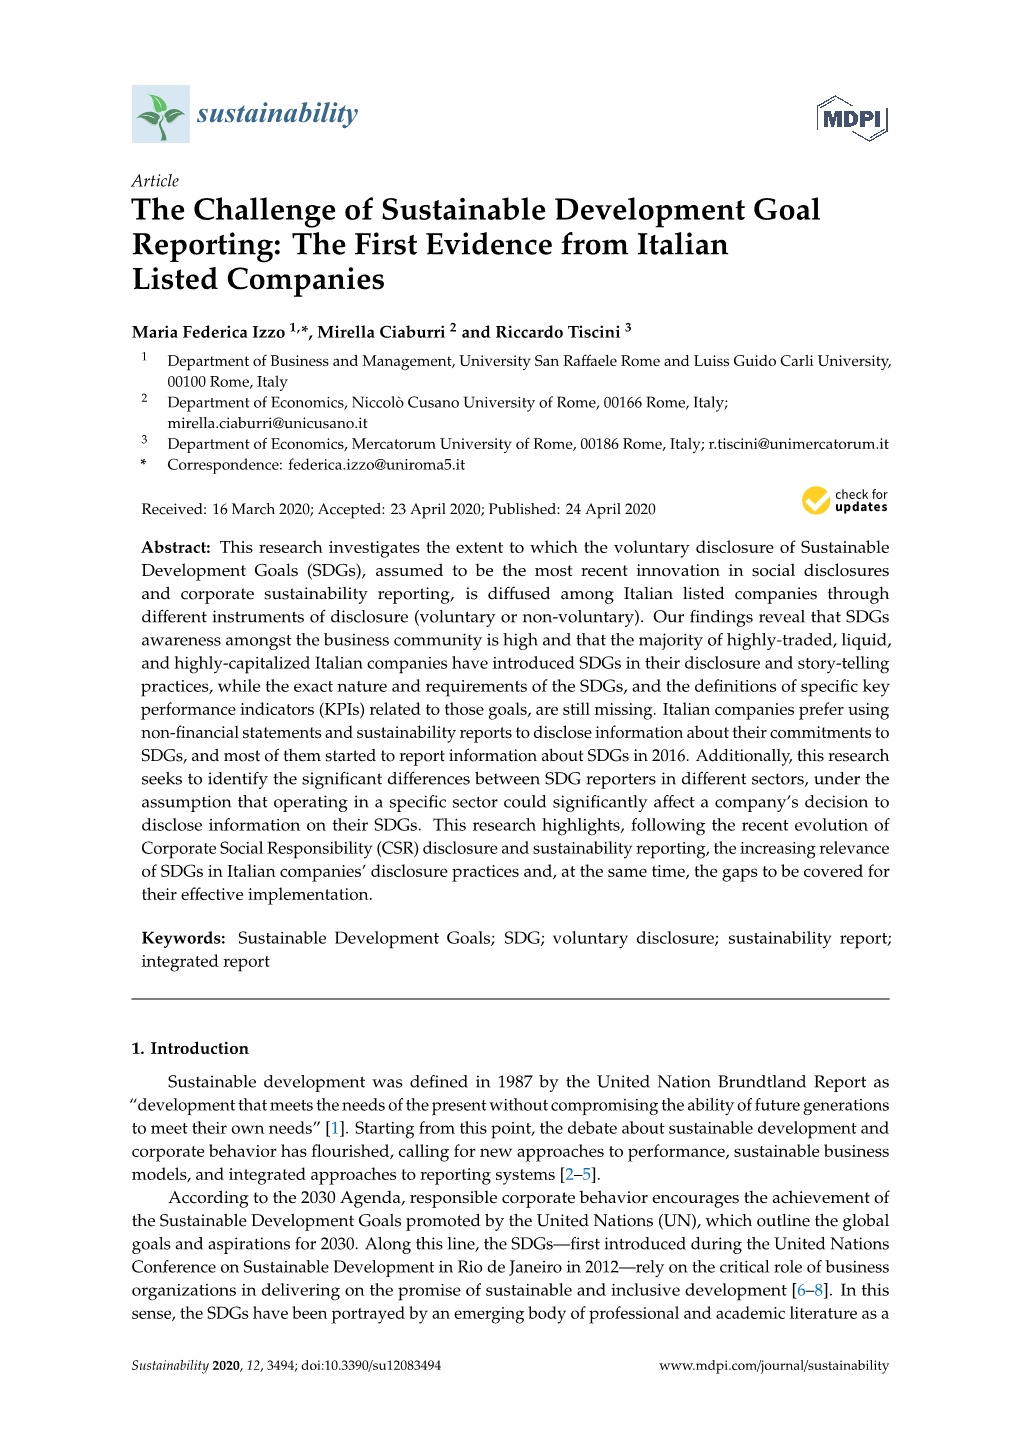 The Challenge of Sustainable Development Goal Reporting: the First Evidence from Italian Listed Companies